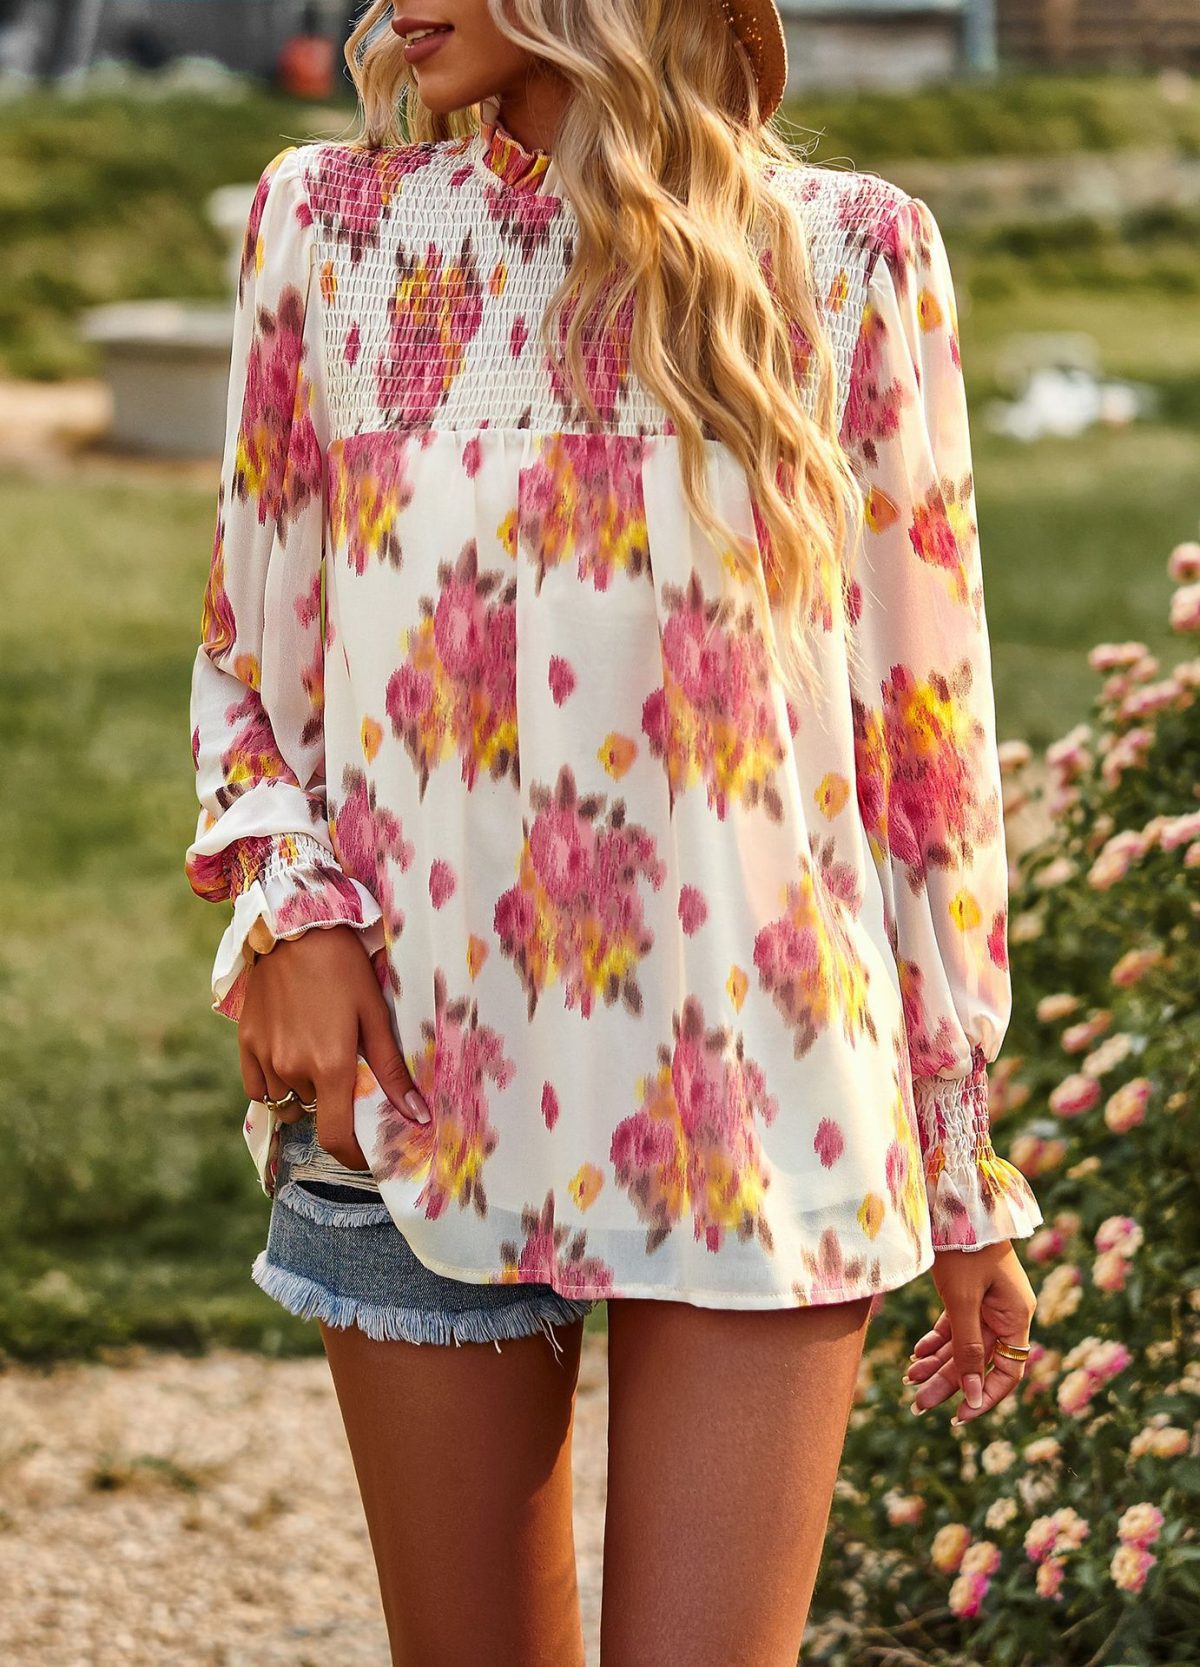 Floral Print Elegant Double Layer Blouse in Blouses & Shirts